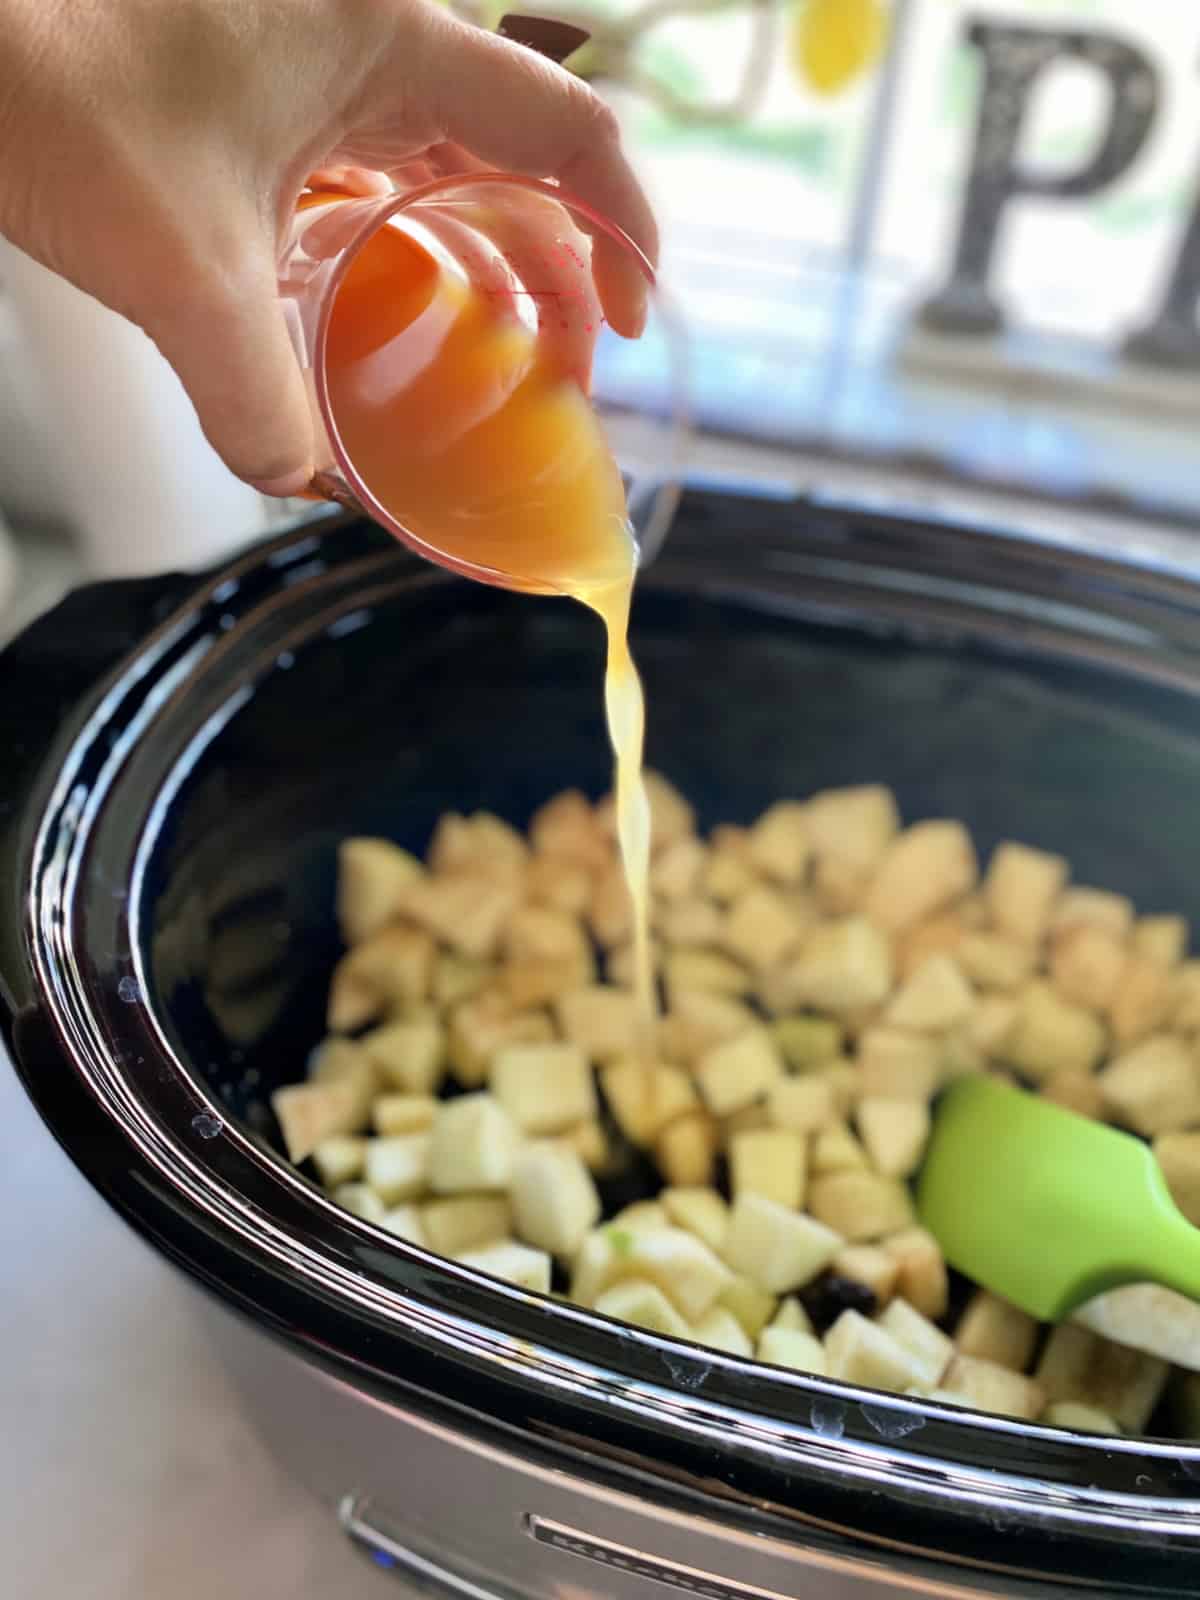 Female hand pouring apple juice into a crock pot filled with diced apples.